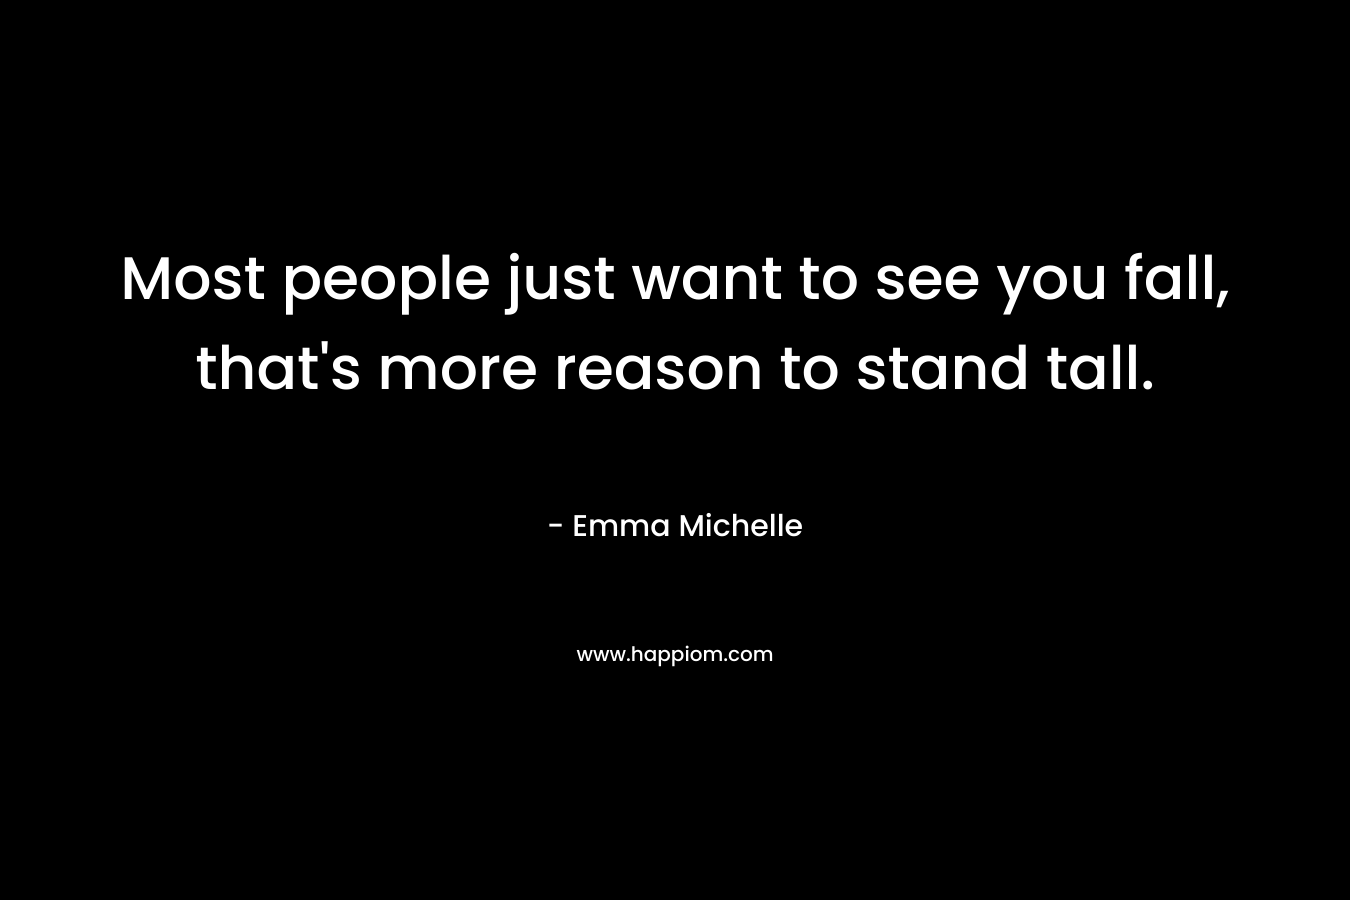 Most people just want to see you fall, that’s more reason to stand tall. – Emma Michelle